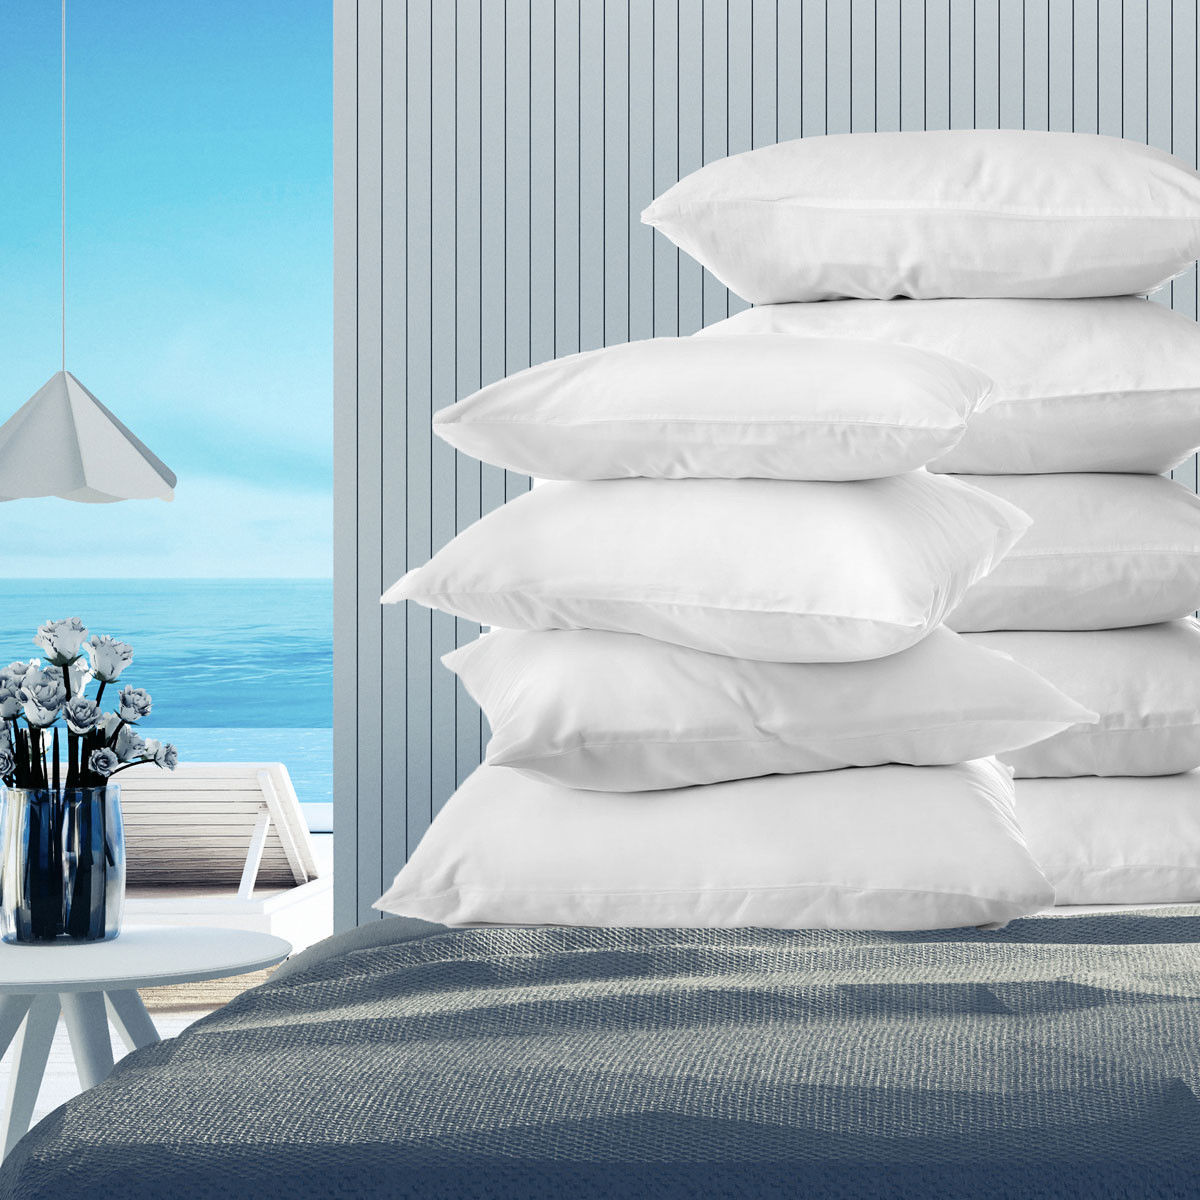 What extra features does the Oxford Diamond Pillow offer compared to the T233 cotton pillow?